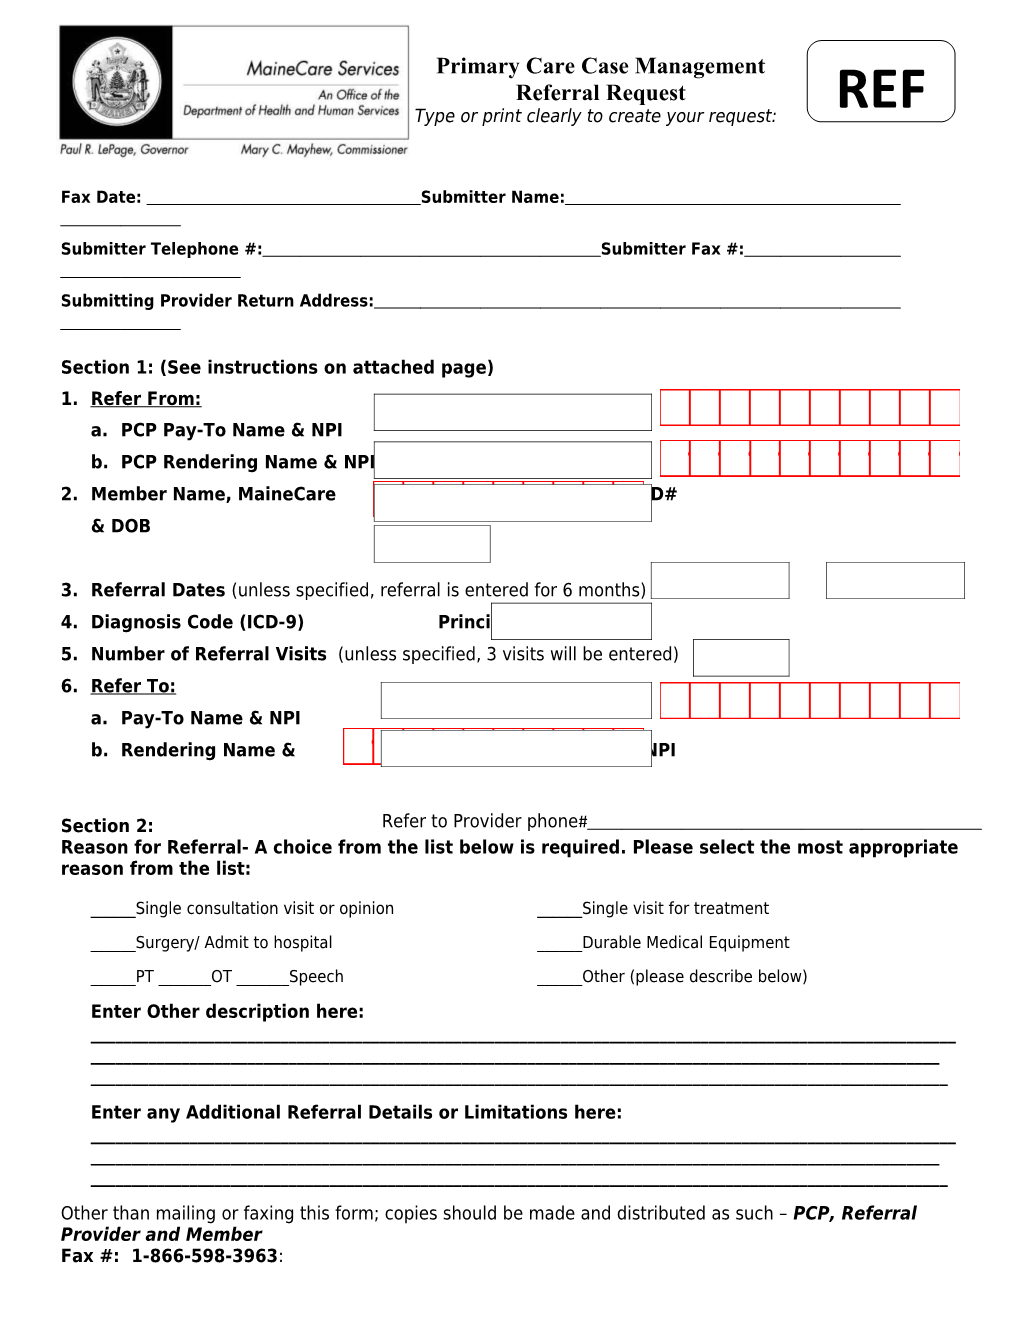 Initial Referral Request Form